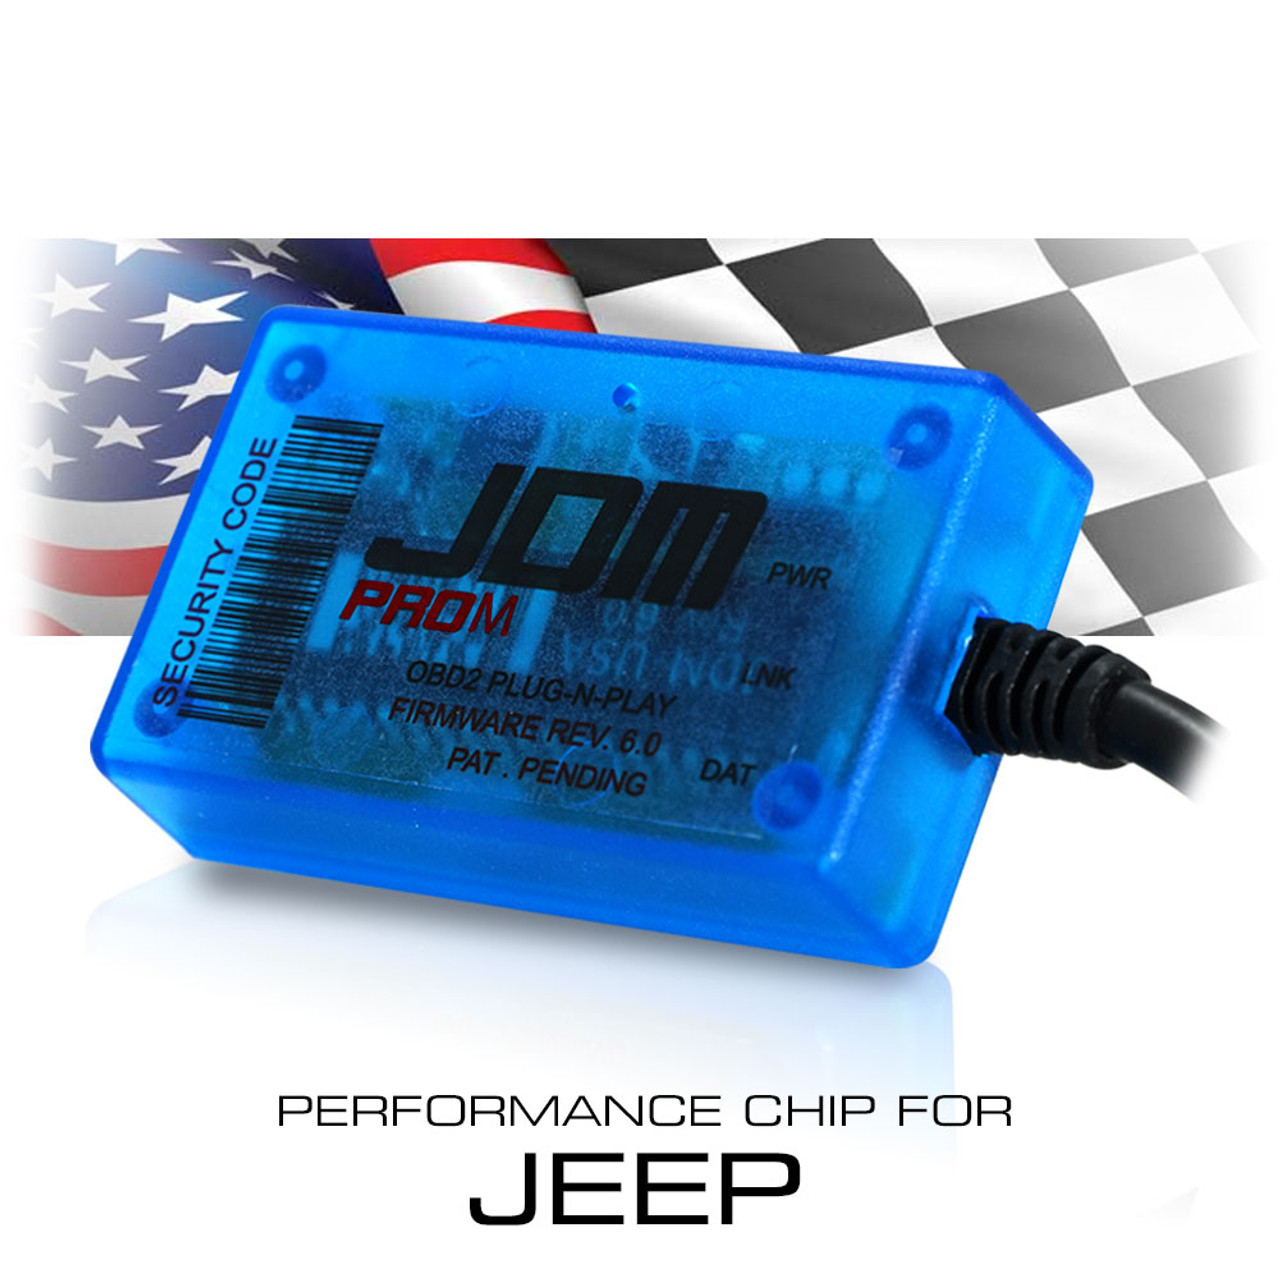 Stage 3 Performance Chip OBDII Module for Jeep - Performance Chip Tuning